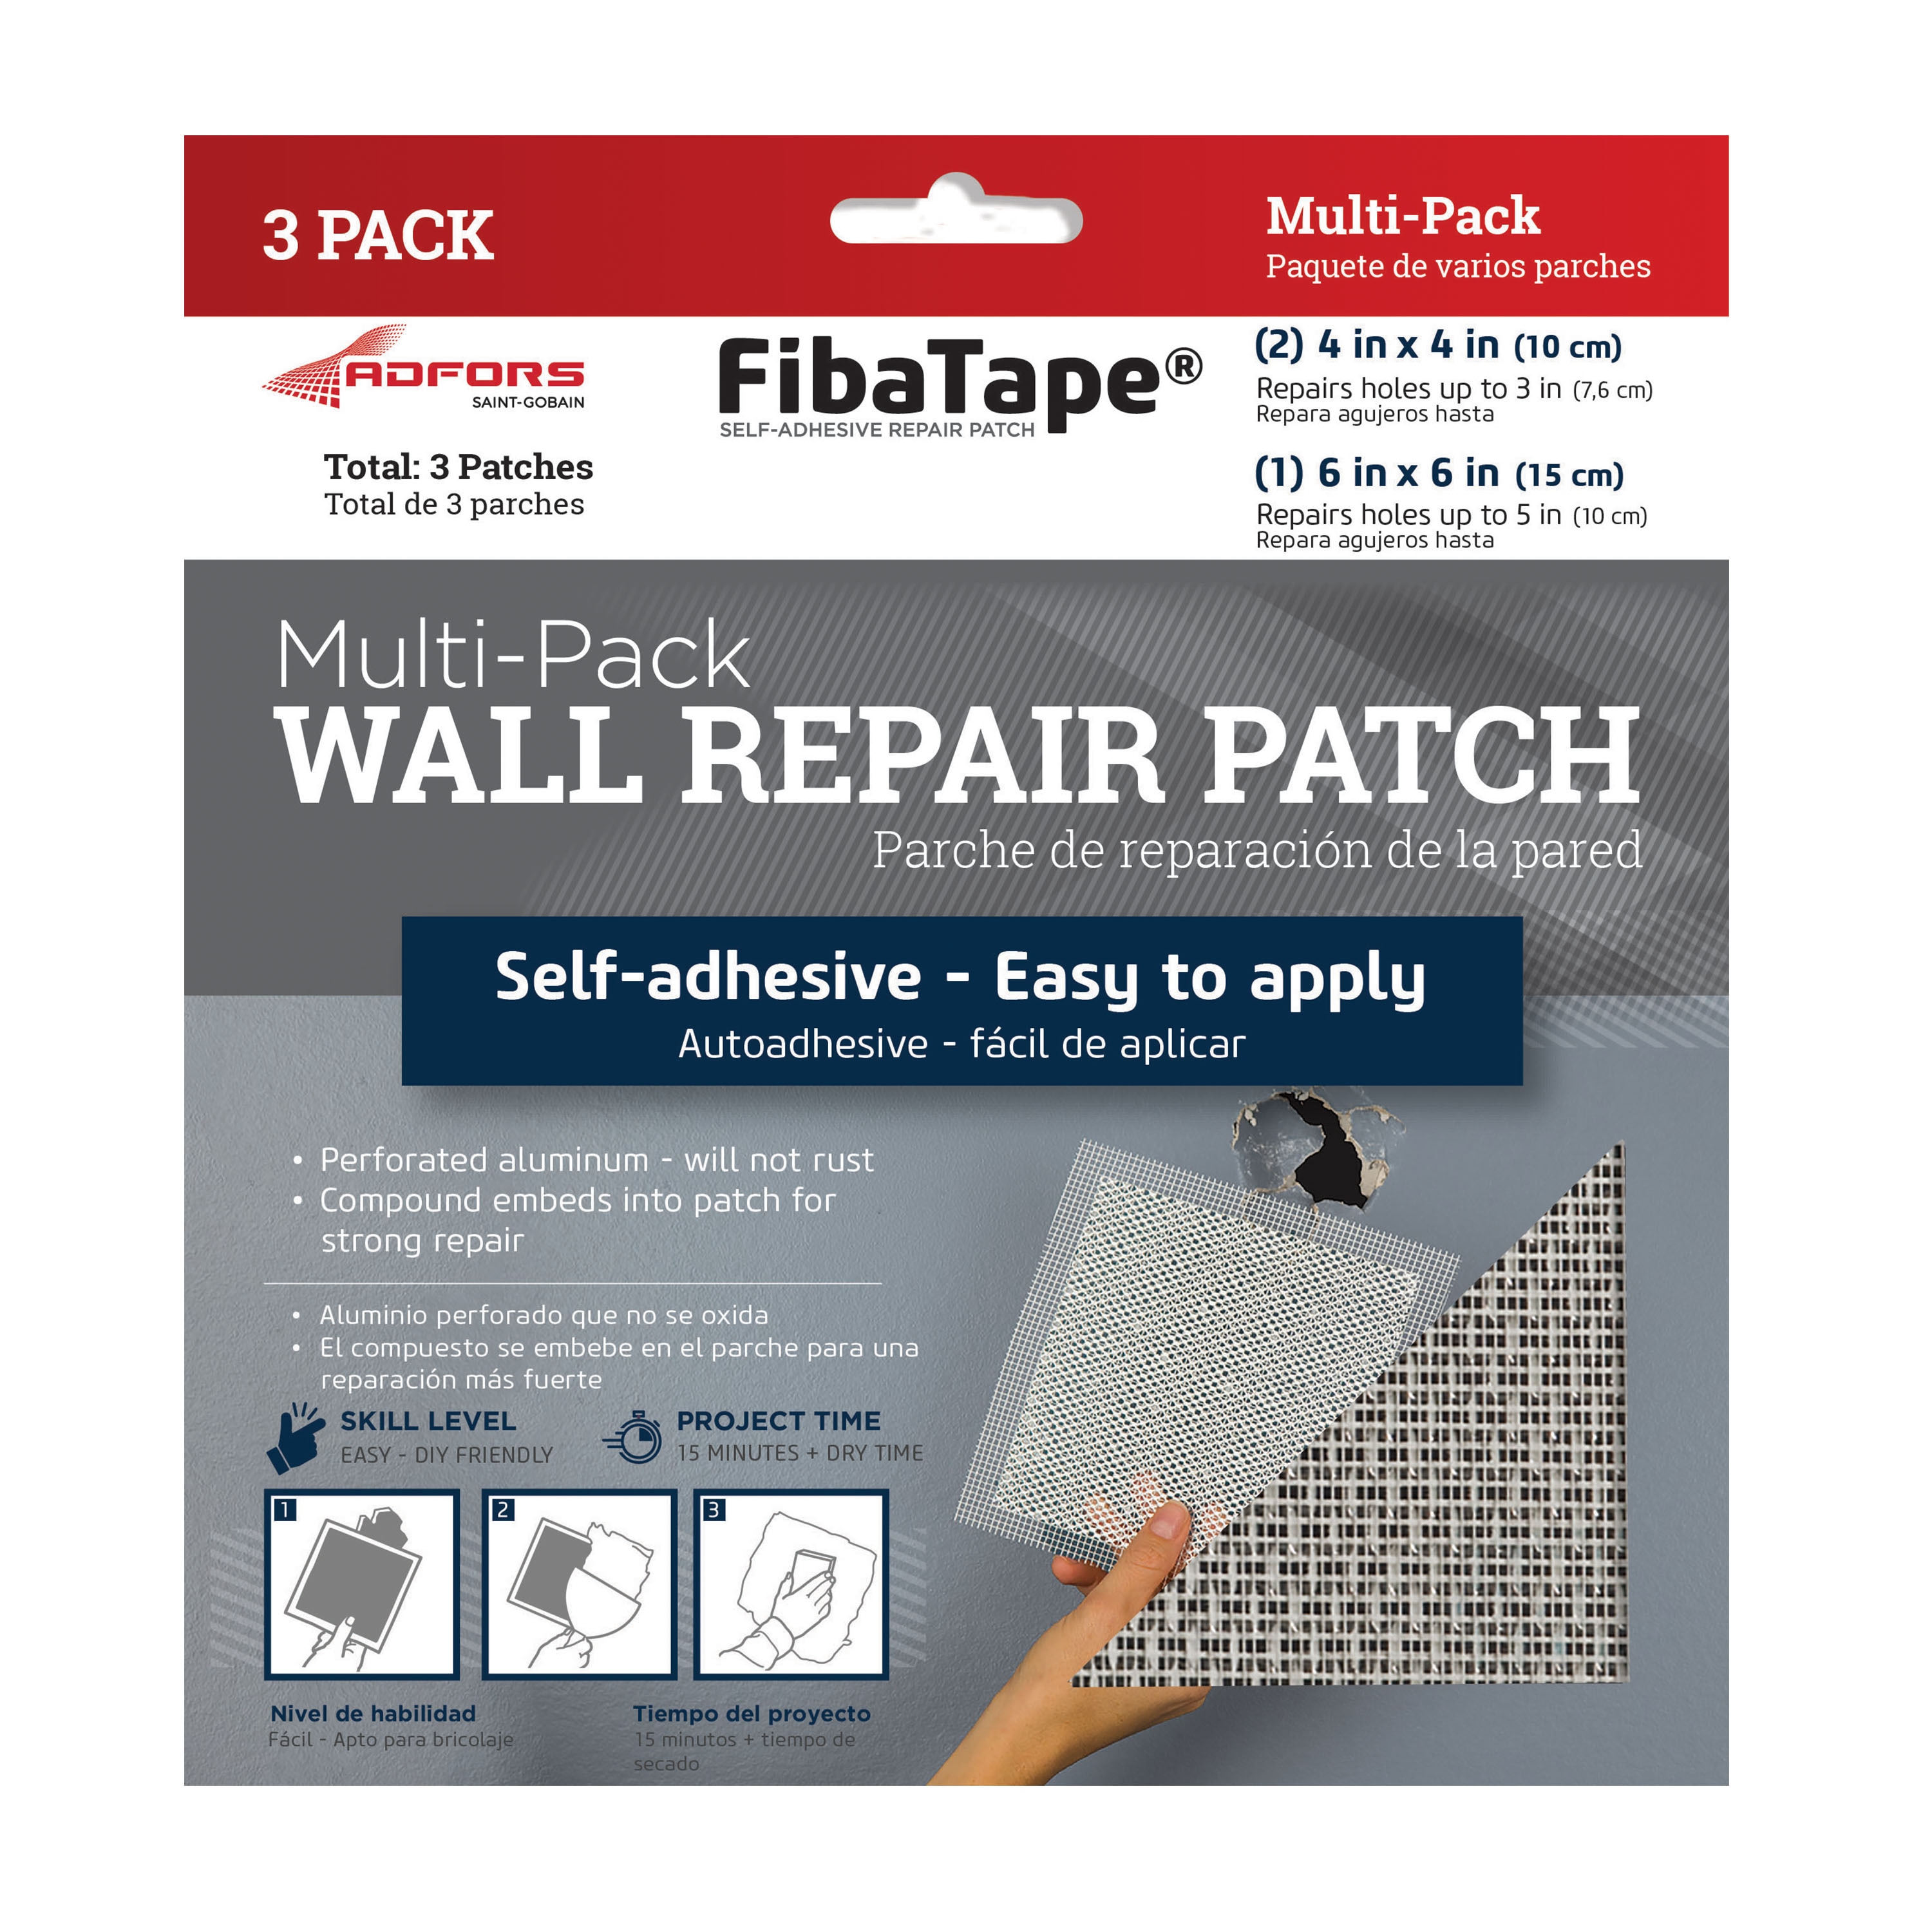 Buy Allway Tools WP4-3 Drywall Patch (Pack of 10)